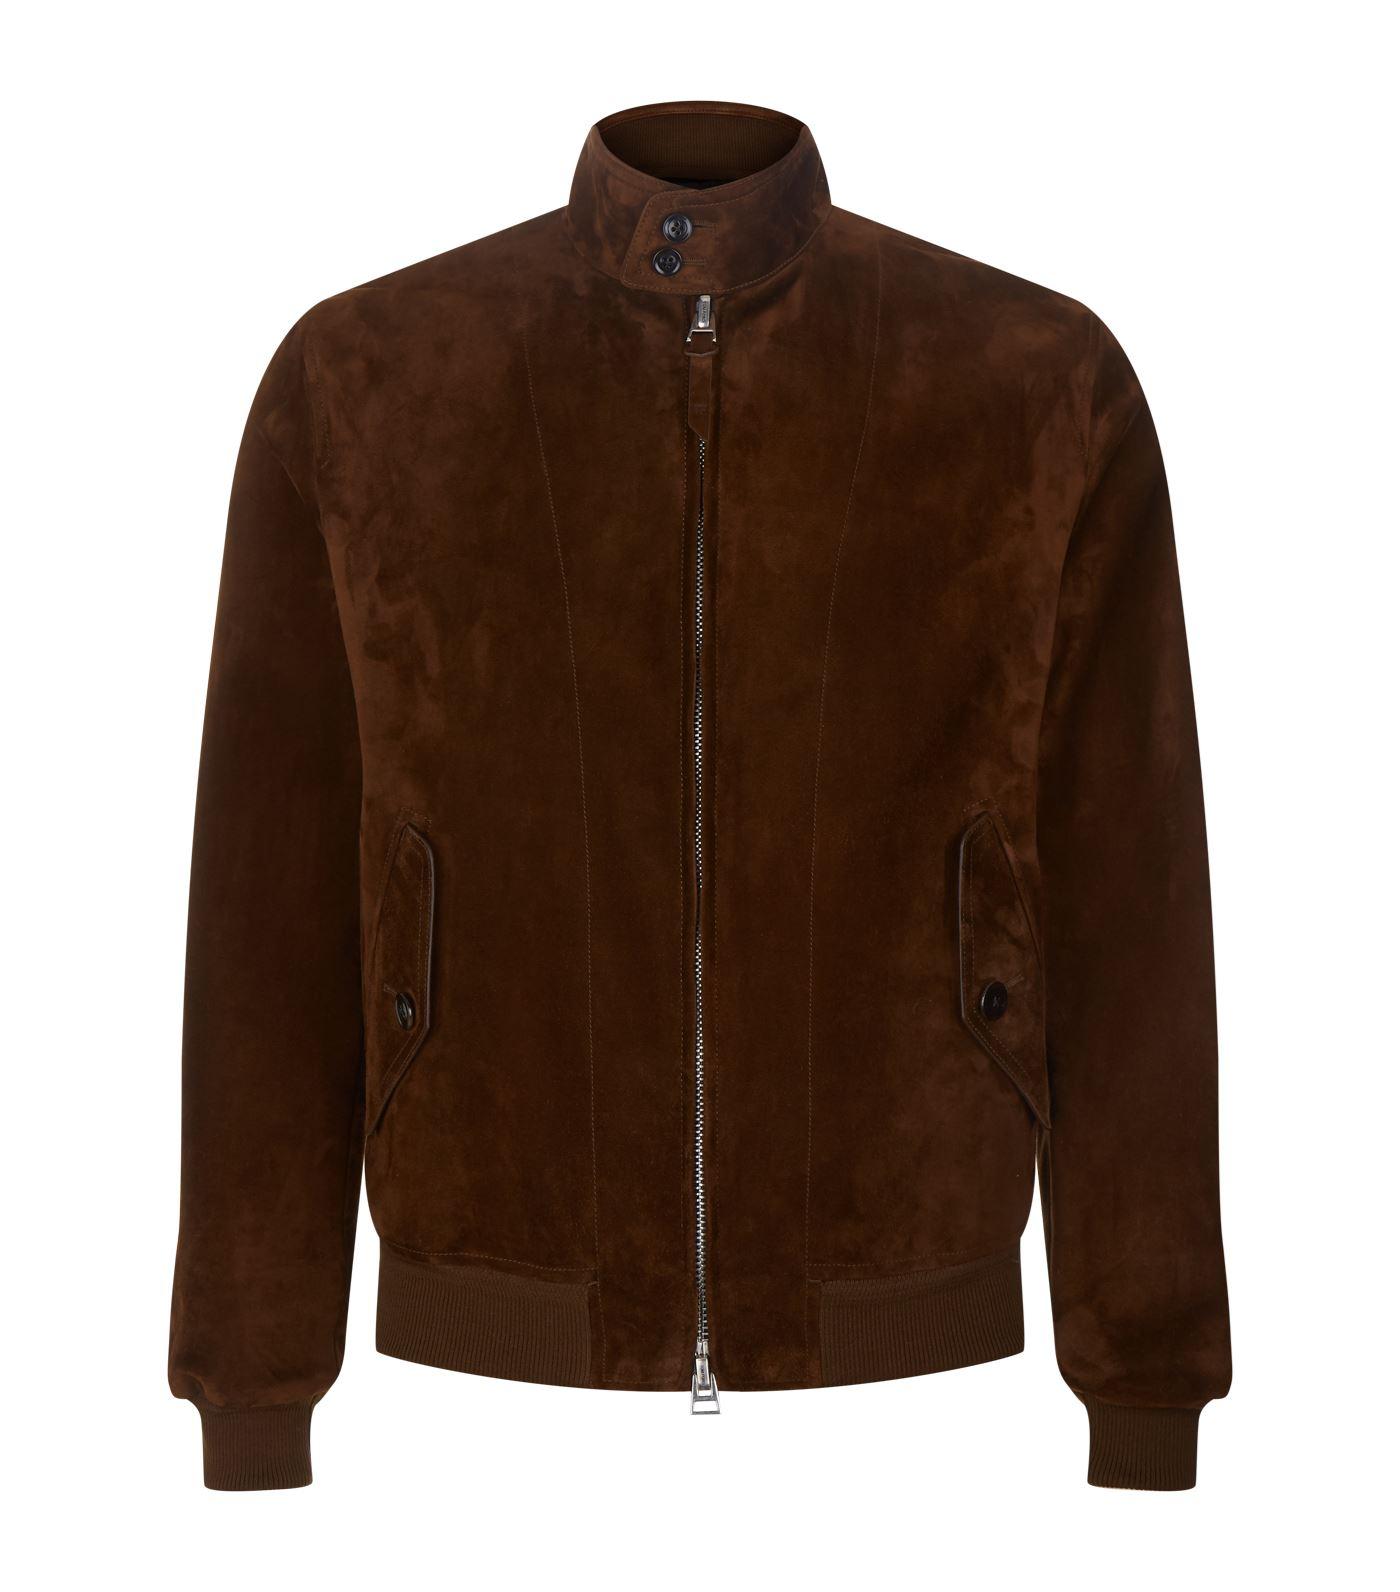 Tom Ford Suede Blouson Jacket in Brown for Men - Lyst